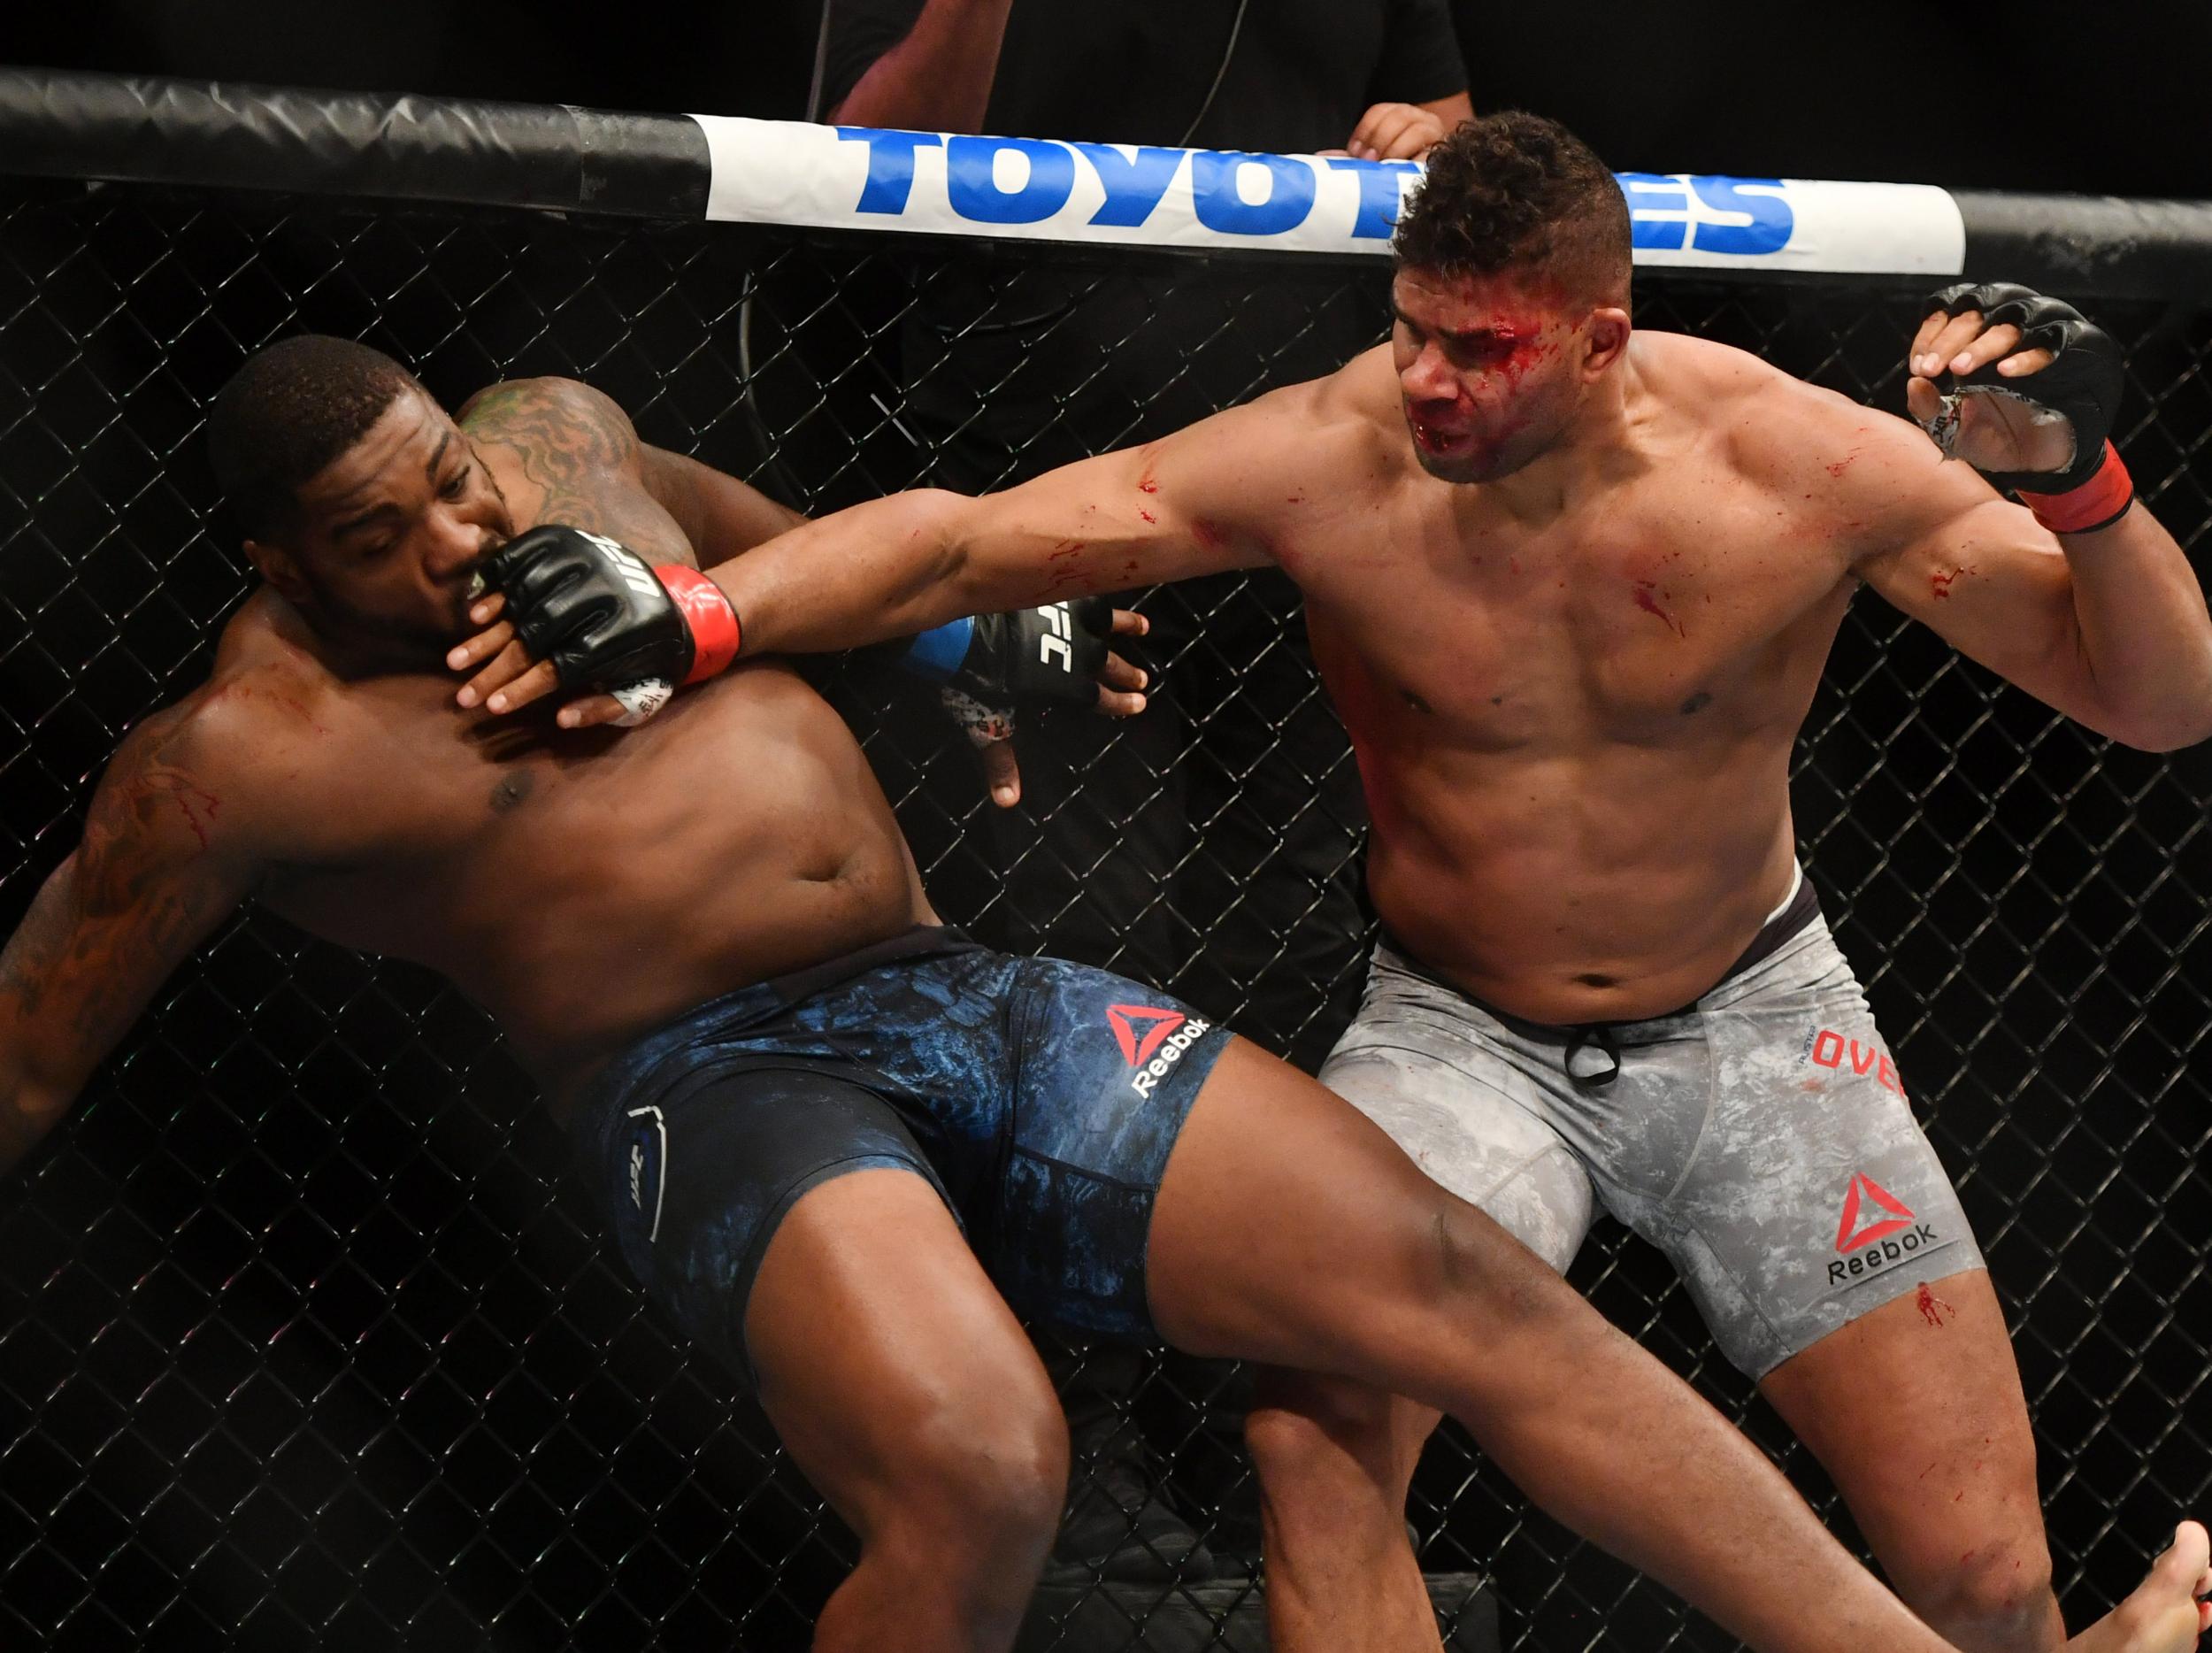 Overeem won the fight in the second round